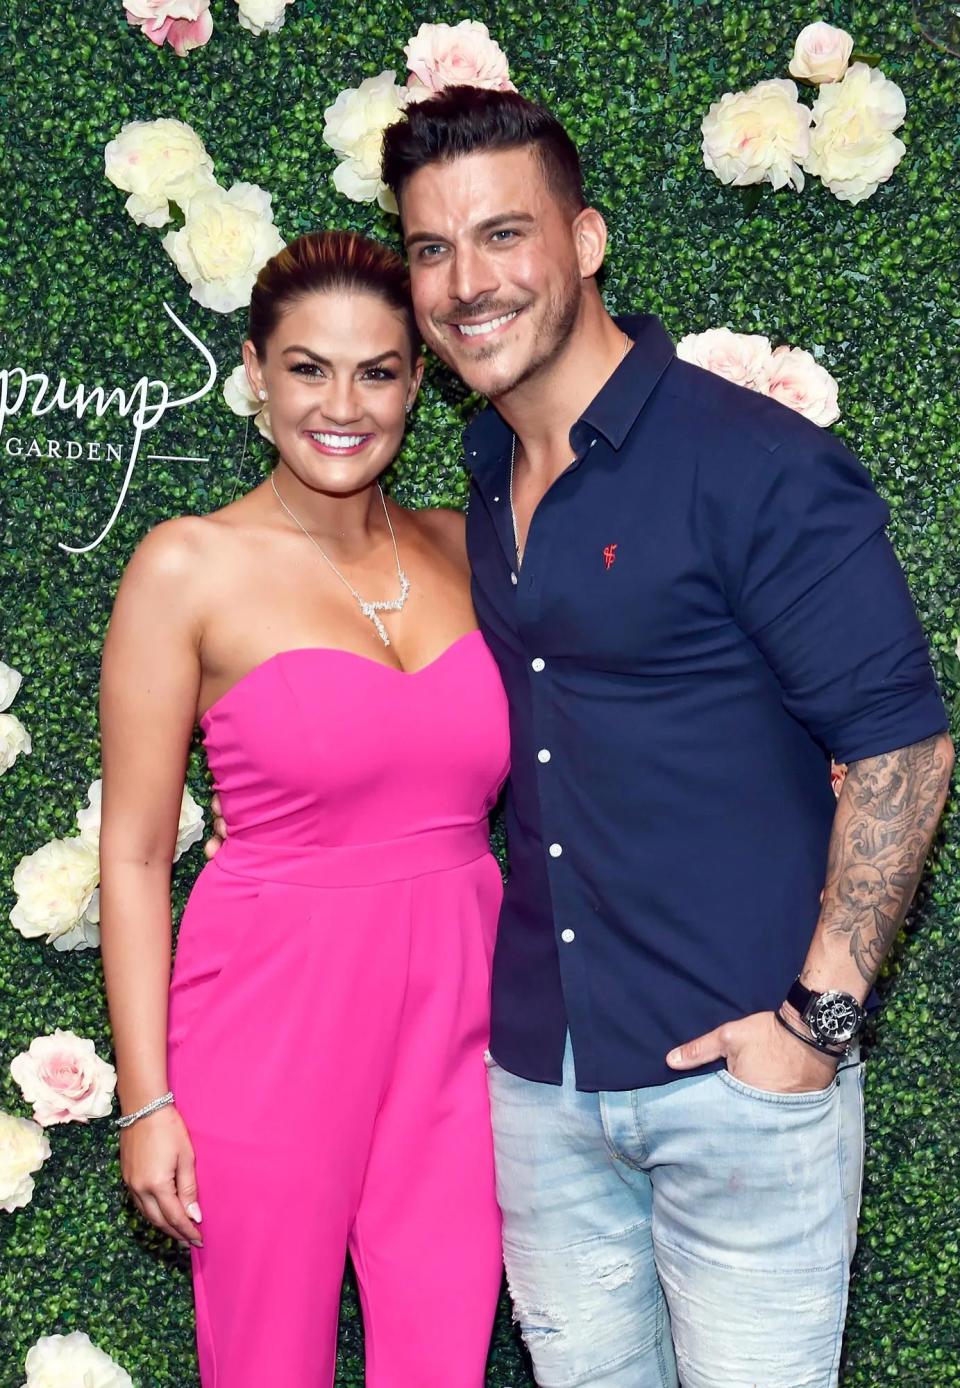 Jax Taylor Thinks Brittany Cartwright Will 'Destroy' Her Body by Drinking Too Much: 'Act Like a Mom'